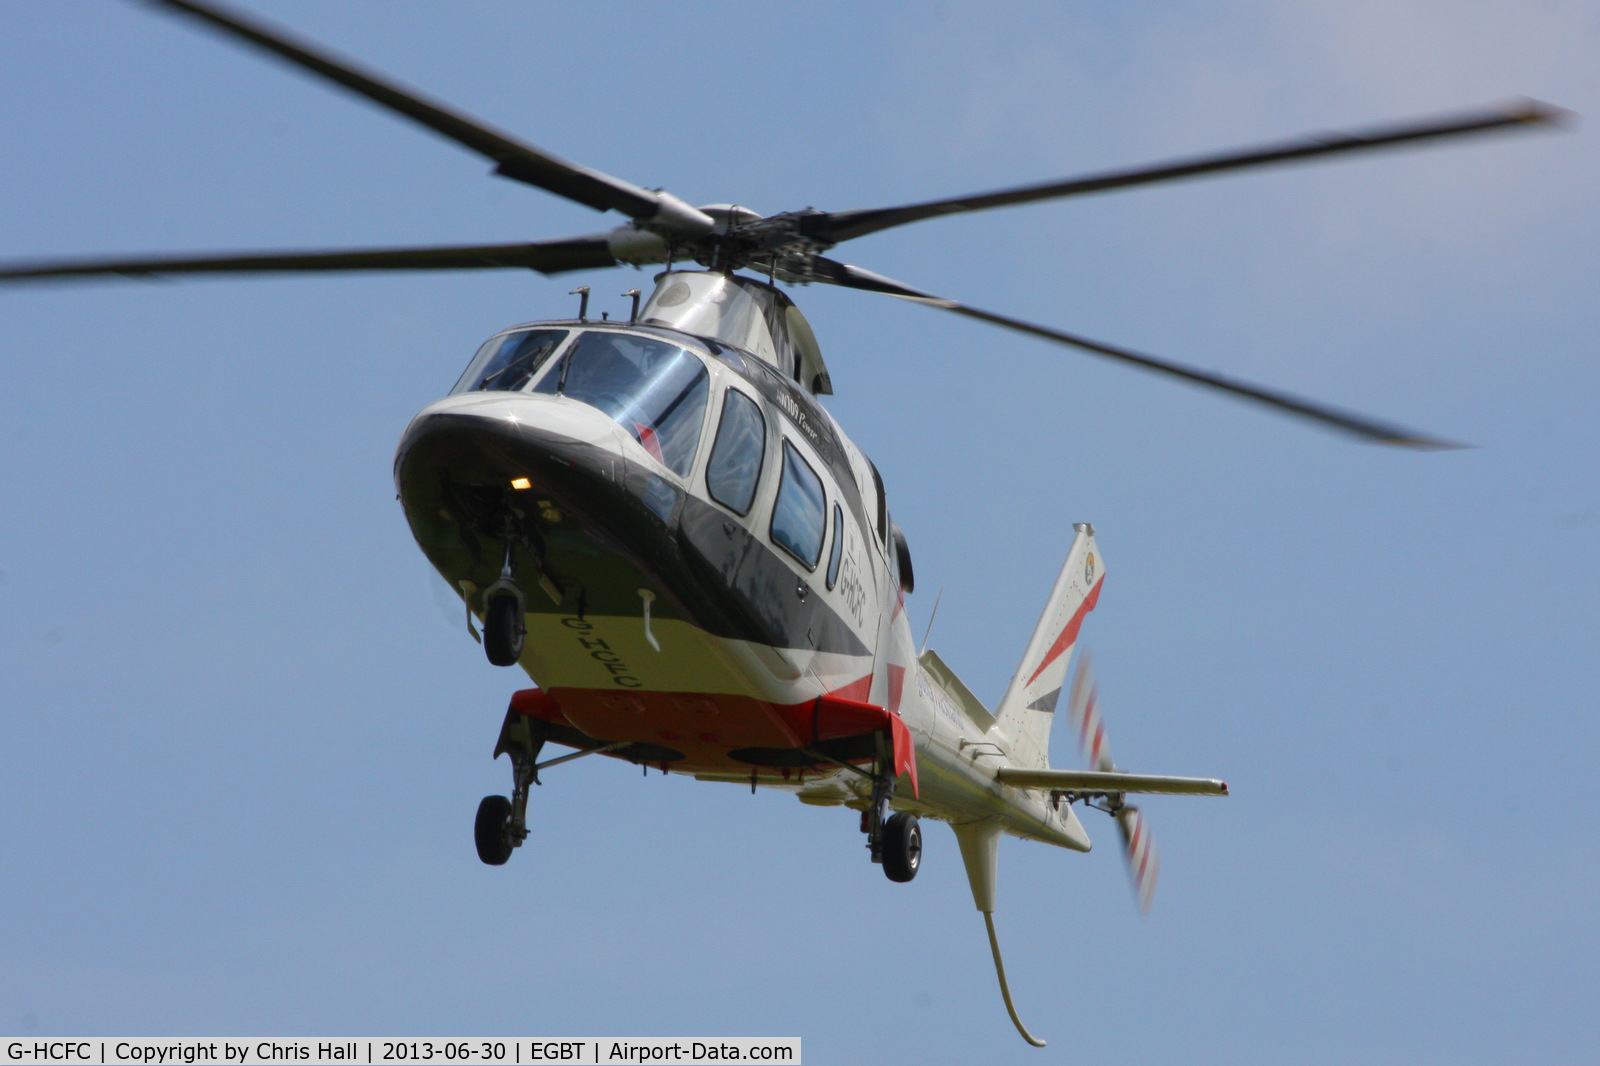 G-HCFC, 1997 Agusta A-109E Power C/N 11011, being used for ferrying race fans to the British F1 Grand Prix at Silverstone